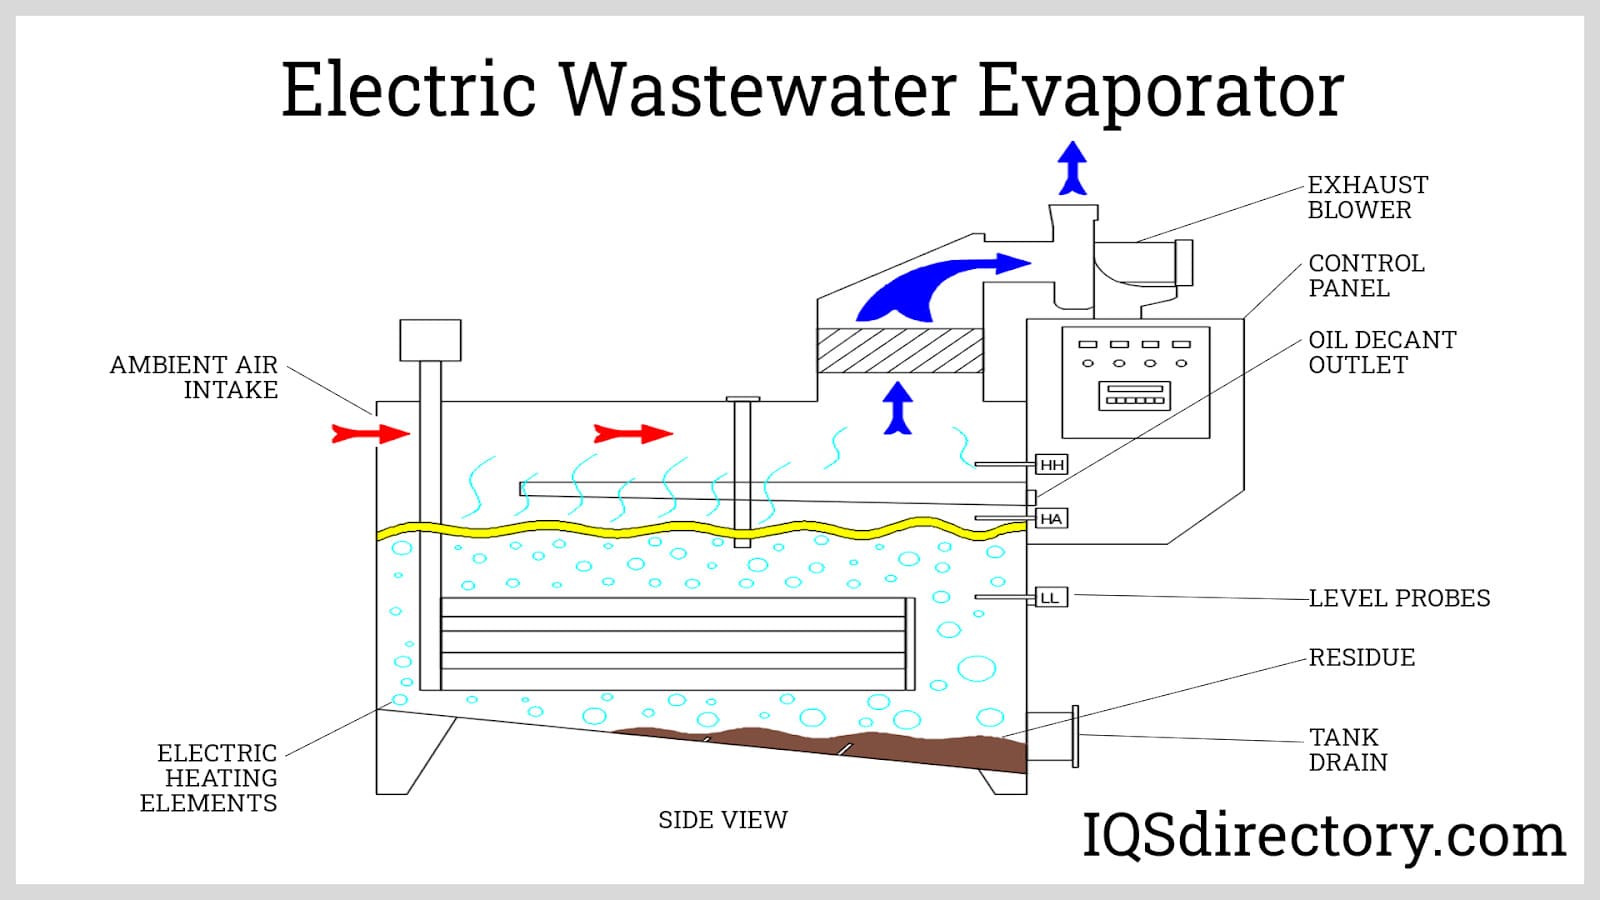 Electric Wastewater Evaporator